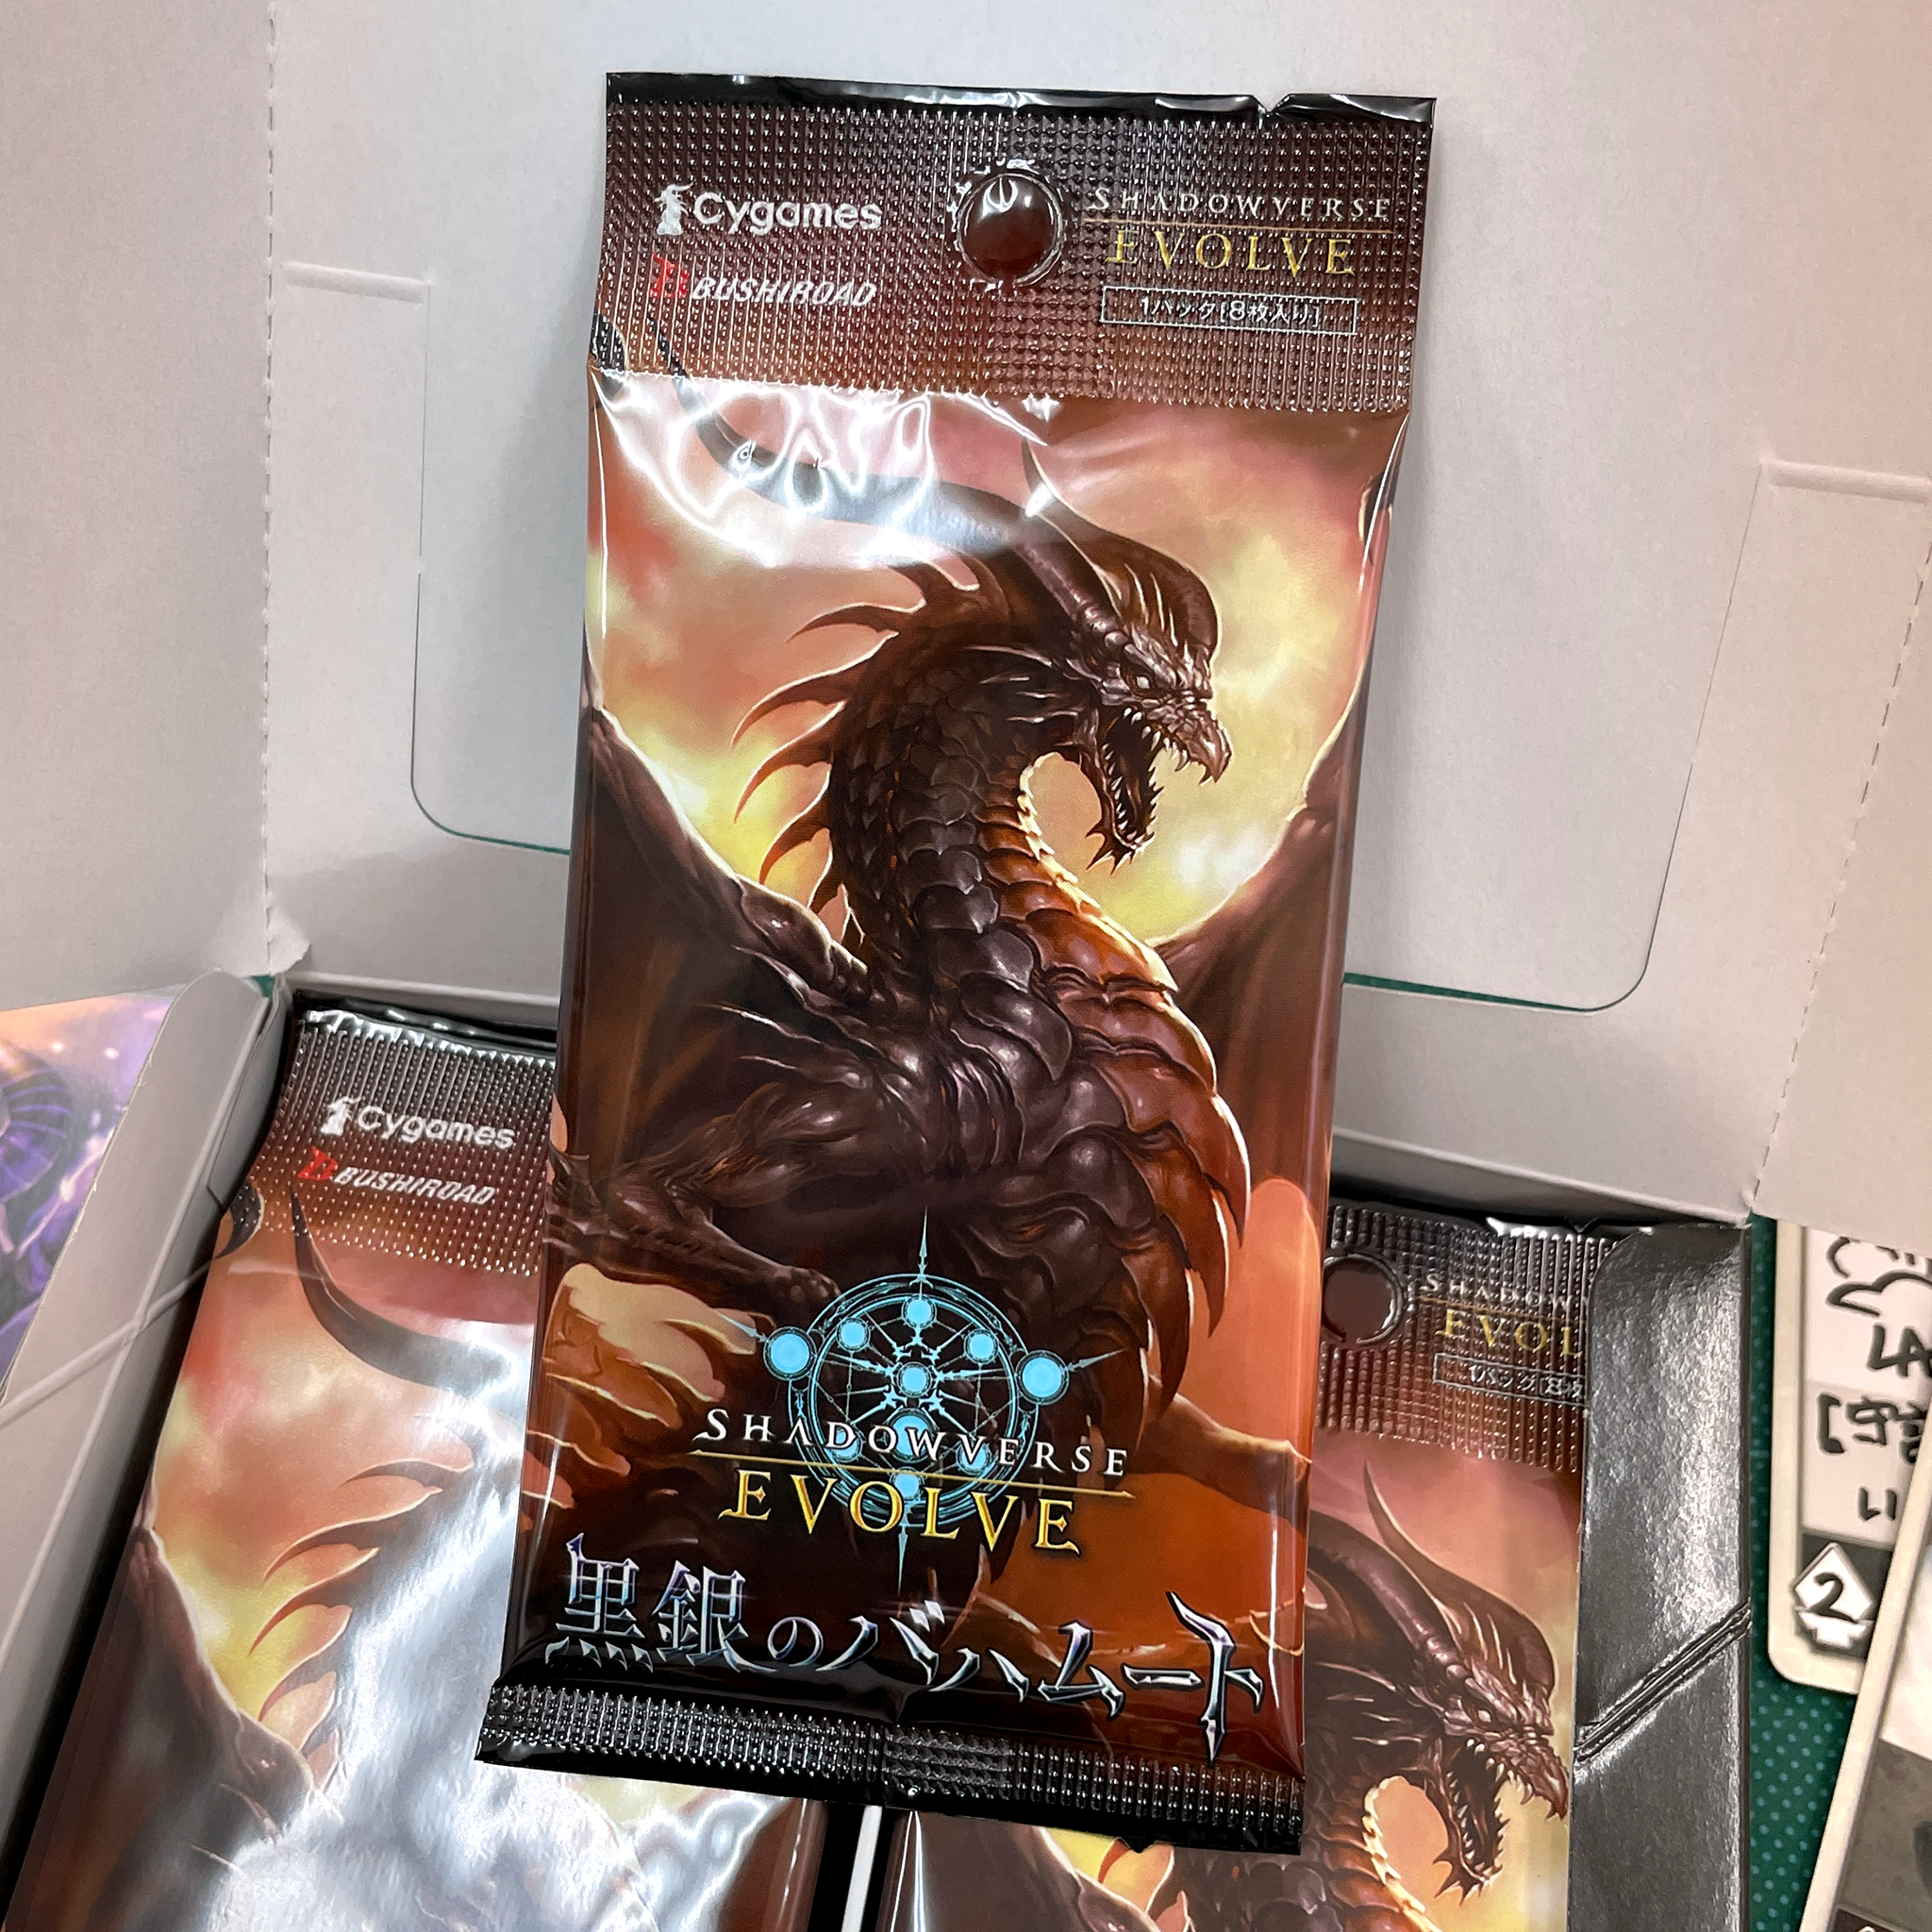 SHADOWVERSE EVOLVE Booster Pack 2 ｢Black Silver Bahamut｣ Booster  Release date: June 30 2022  1 pack: 8 cards